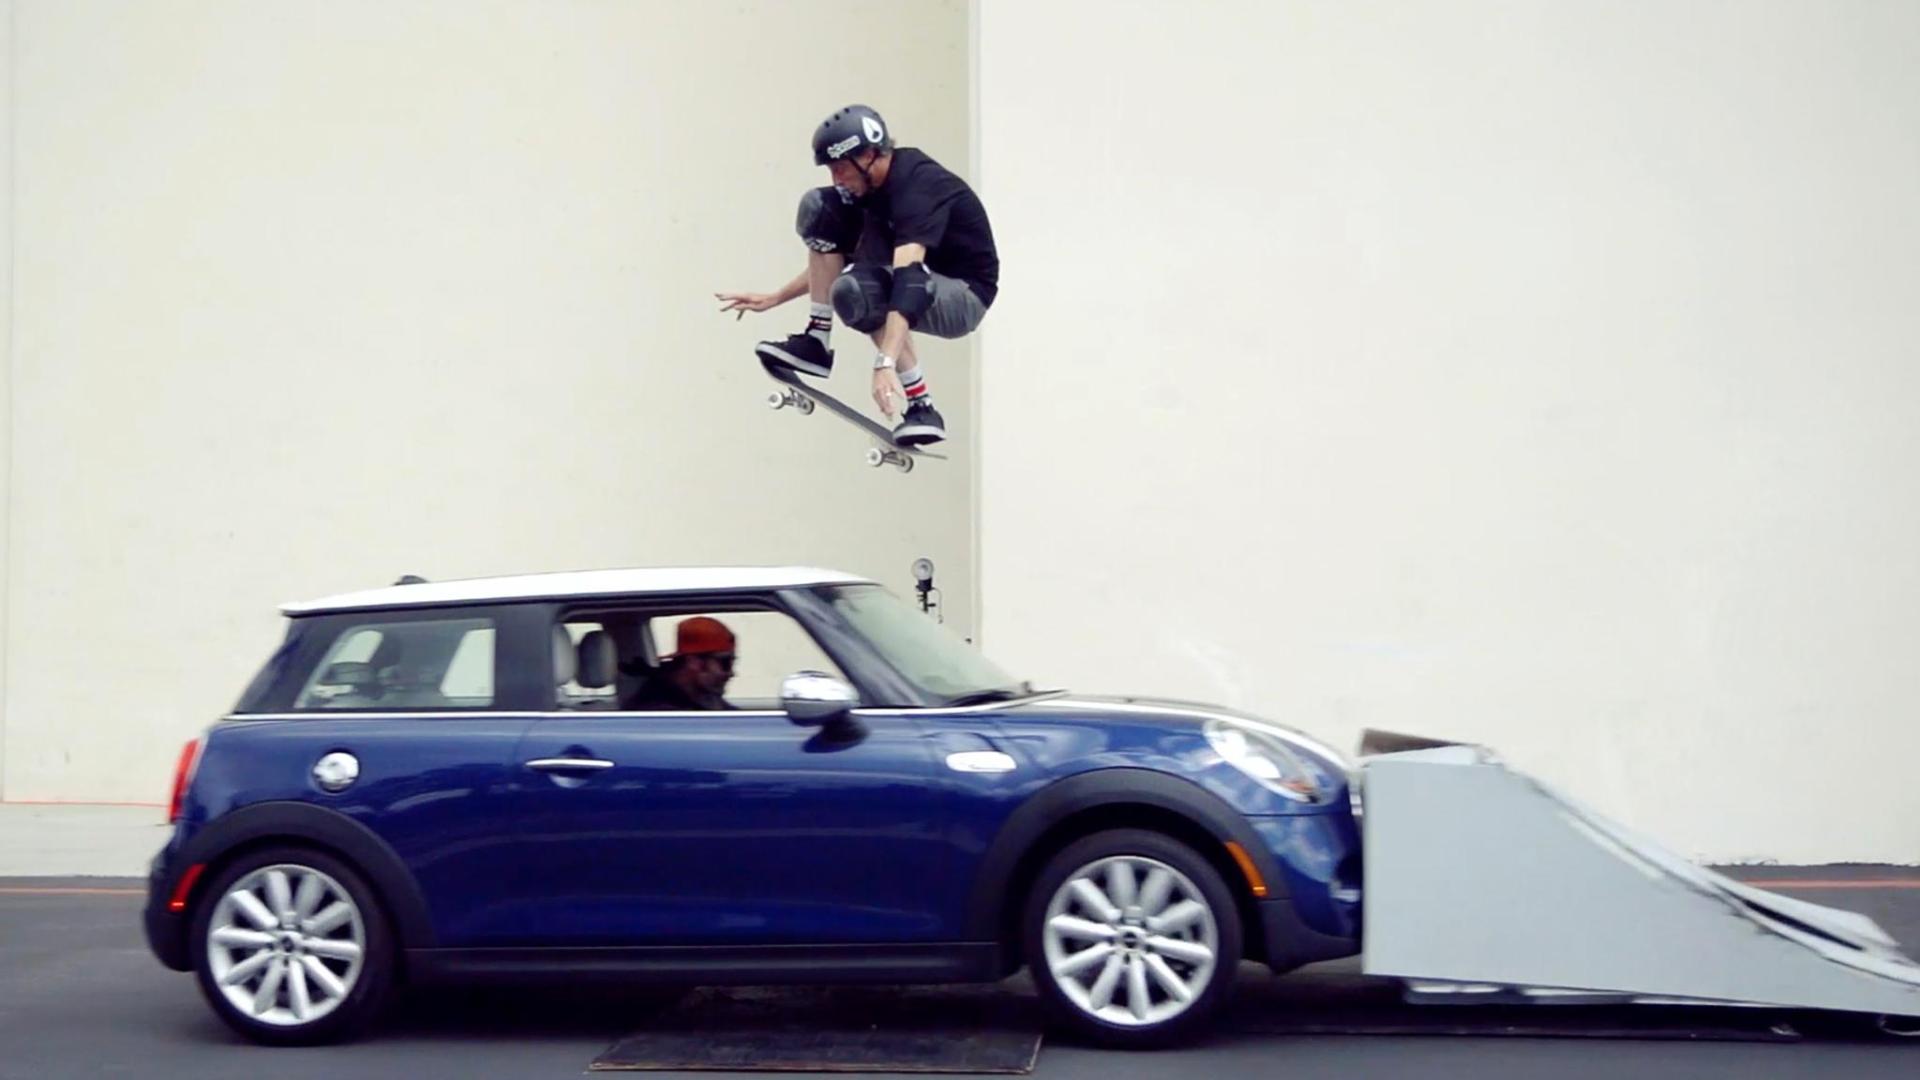 Hot Wheels Skate Partners with Tony Hawk's Vert Alert and X Games